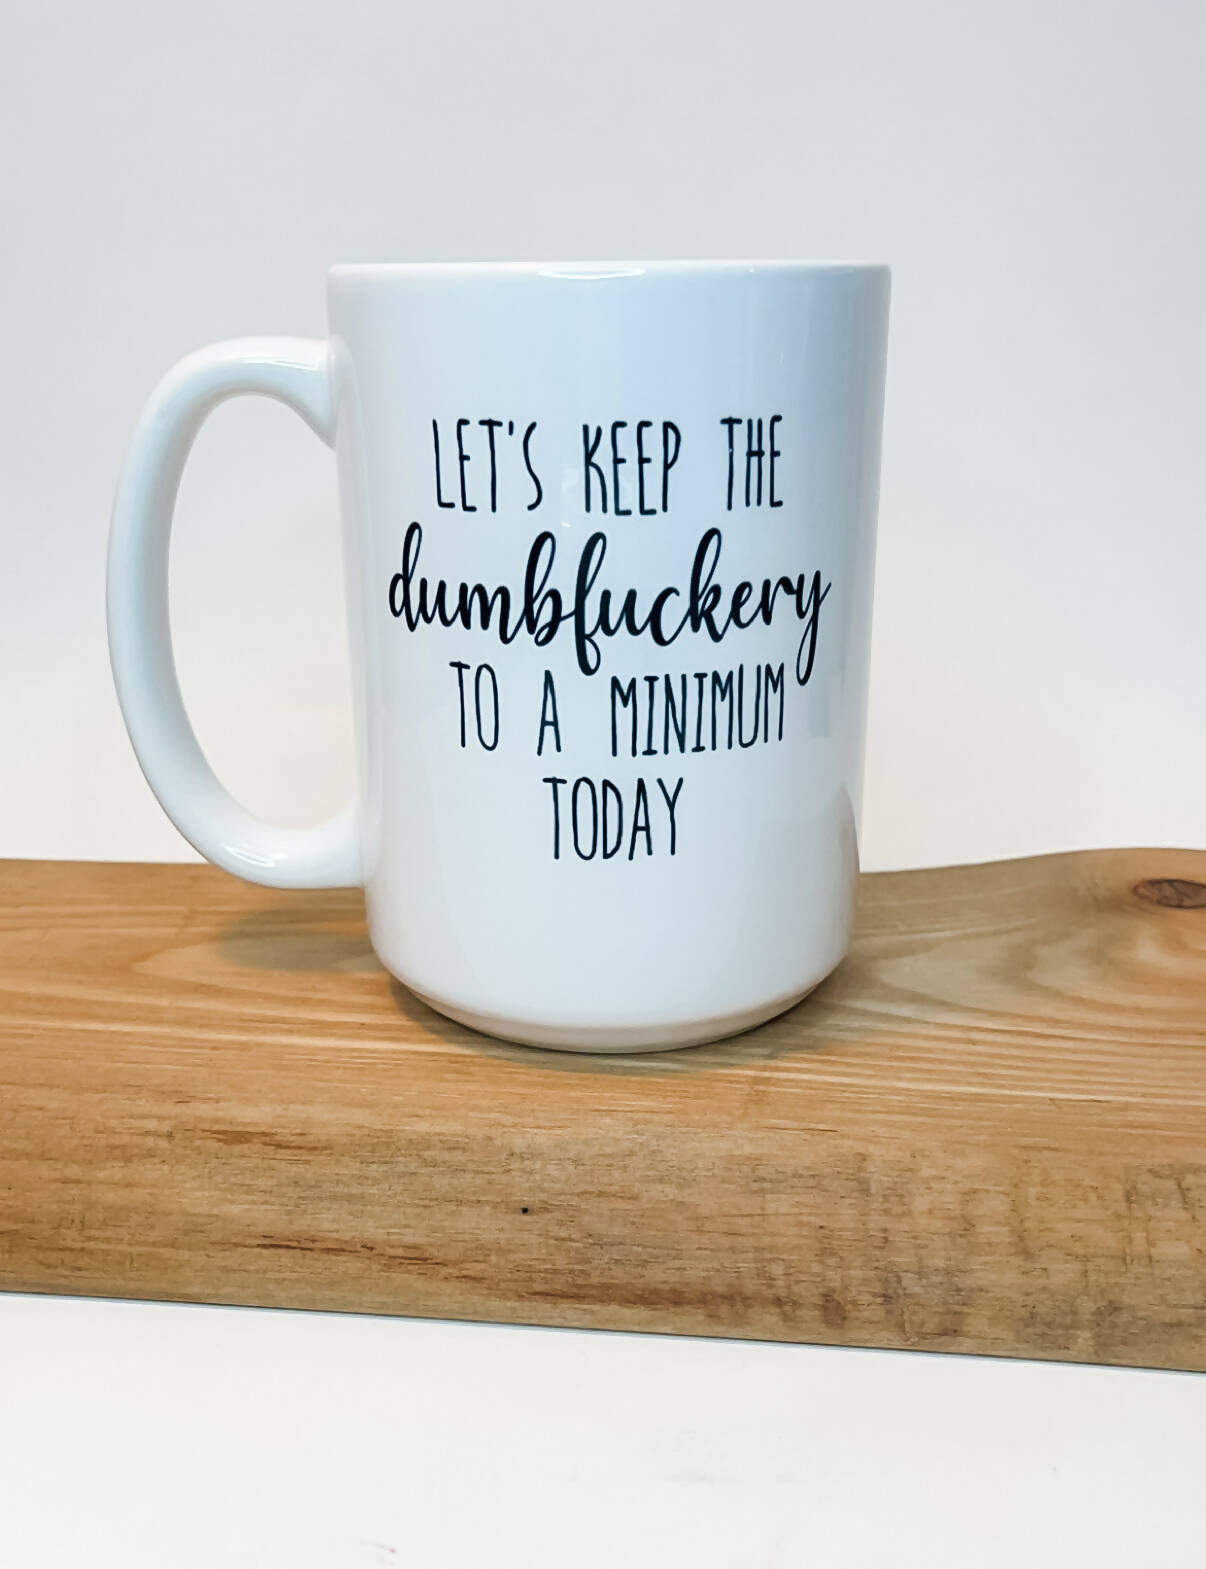 Let's Keep The Dumfuckery To A Minimum Today Mug